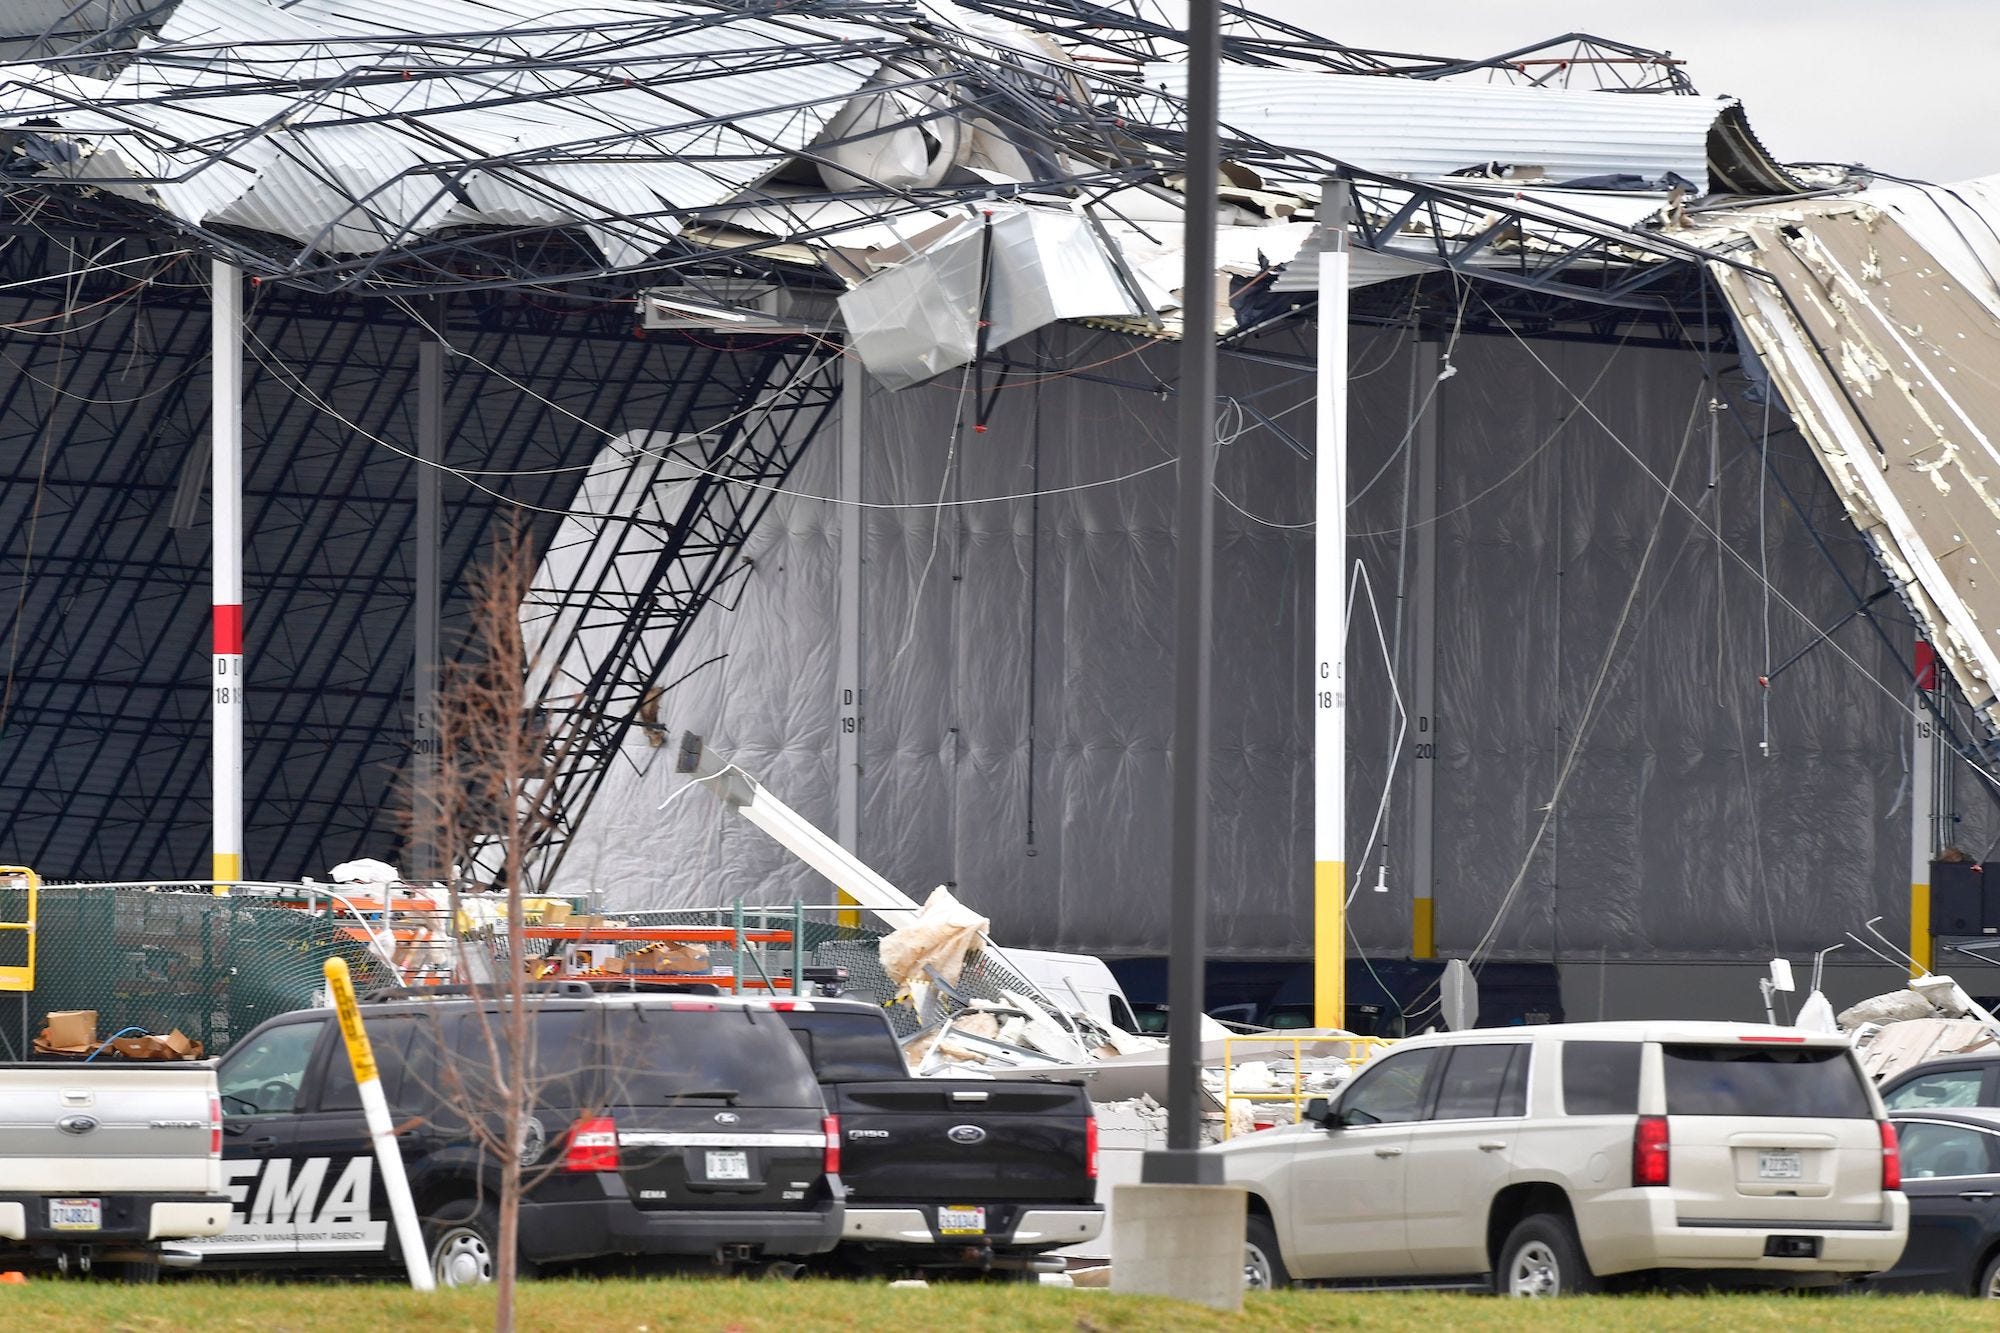 Workers removed debris after a tornado destroys an Amazon warehouse in Illinois.